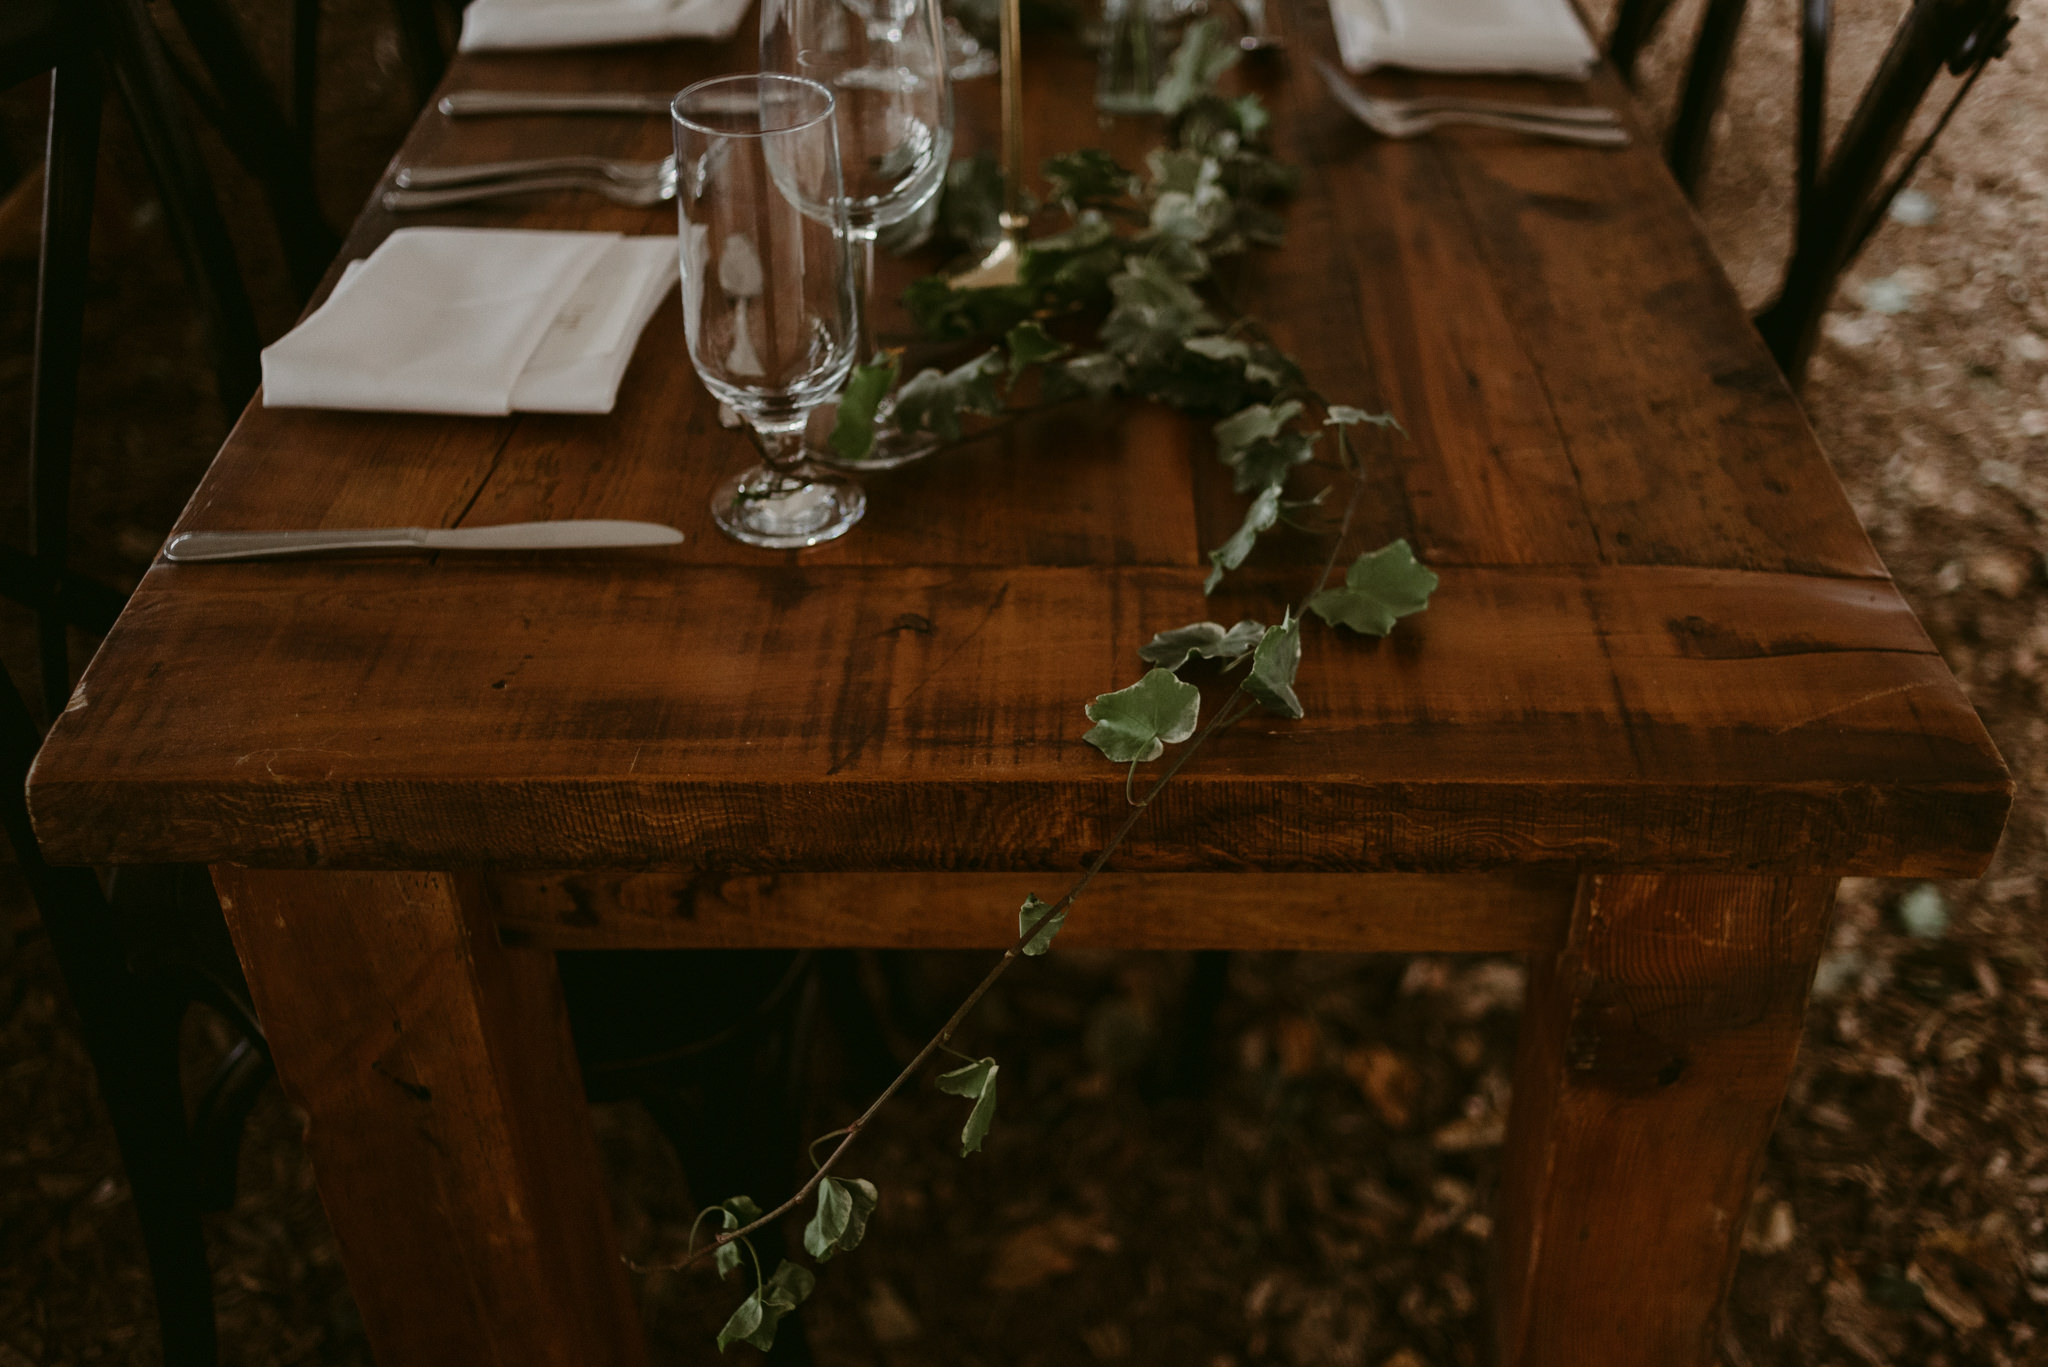 vines on wooden table for wedding reception table setup